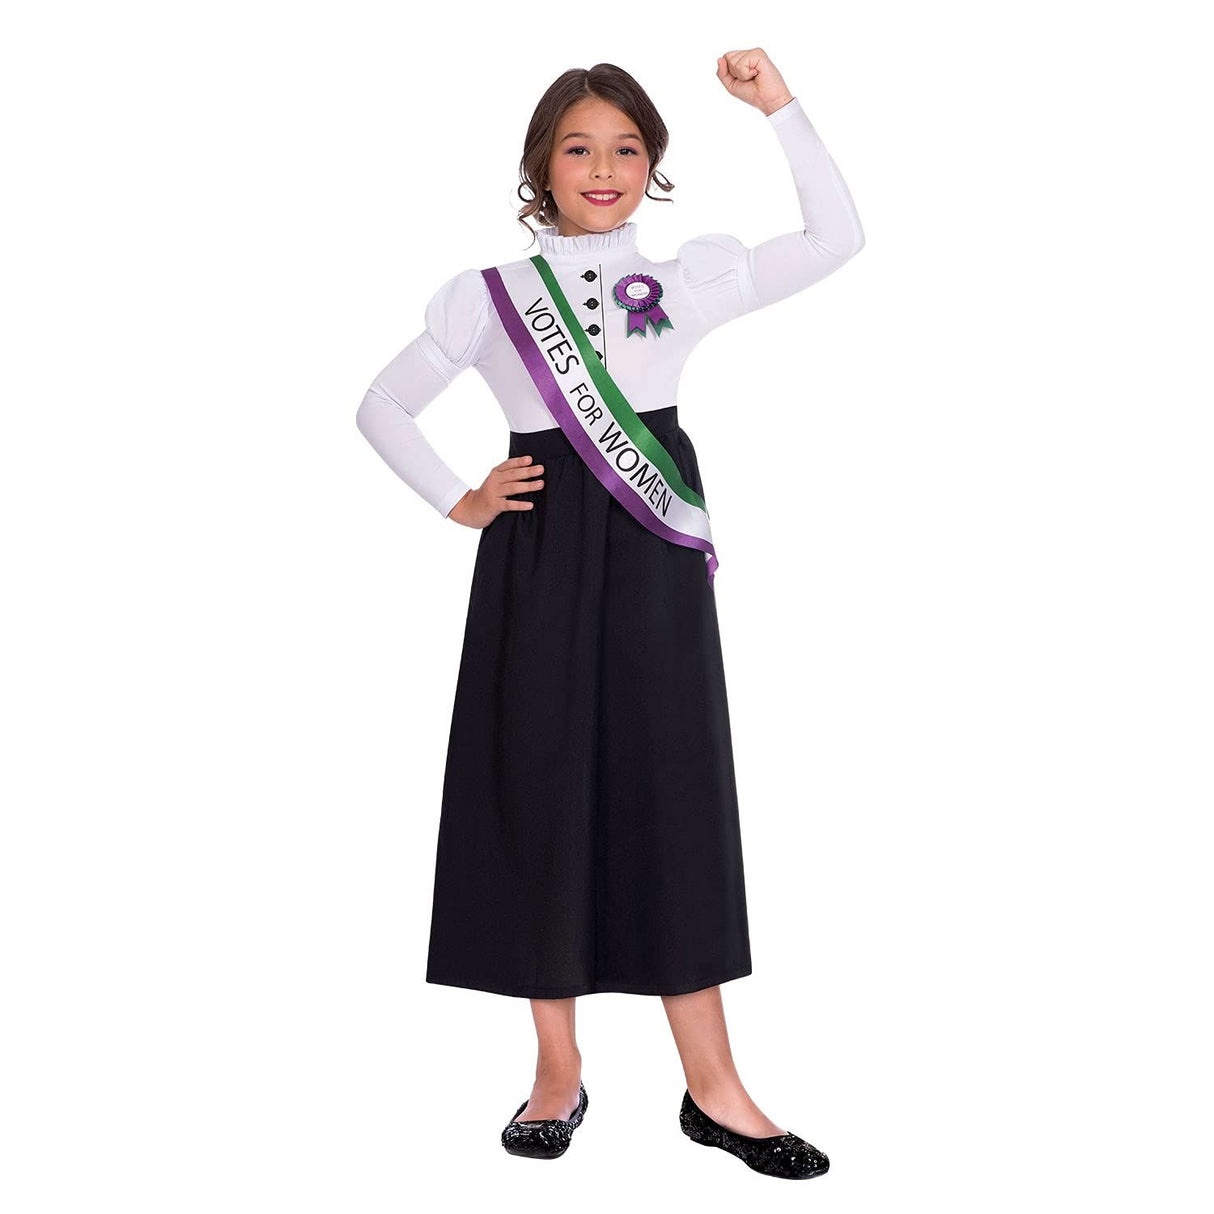 Child Suffragette Girl Costume - 4-6 Years